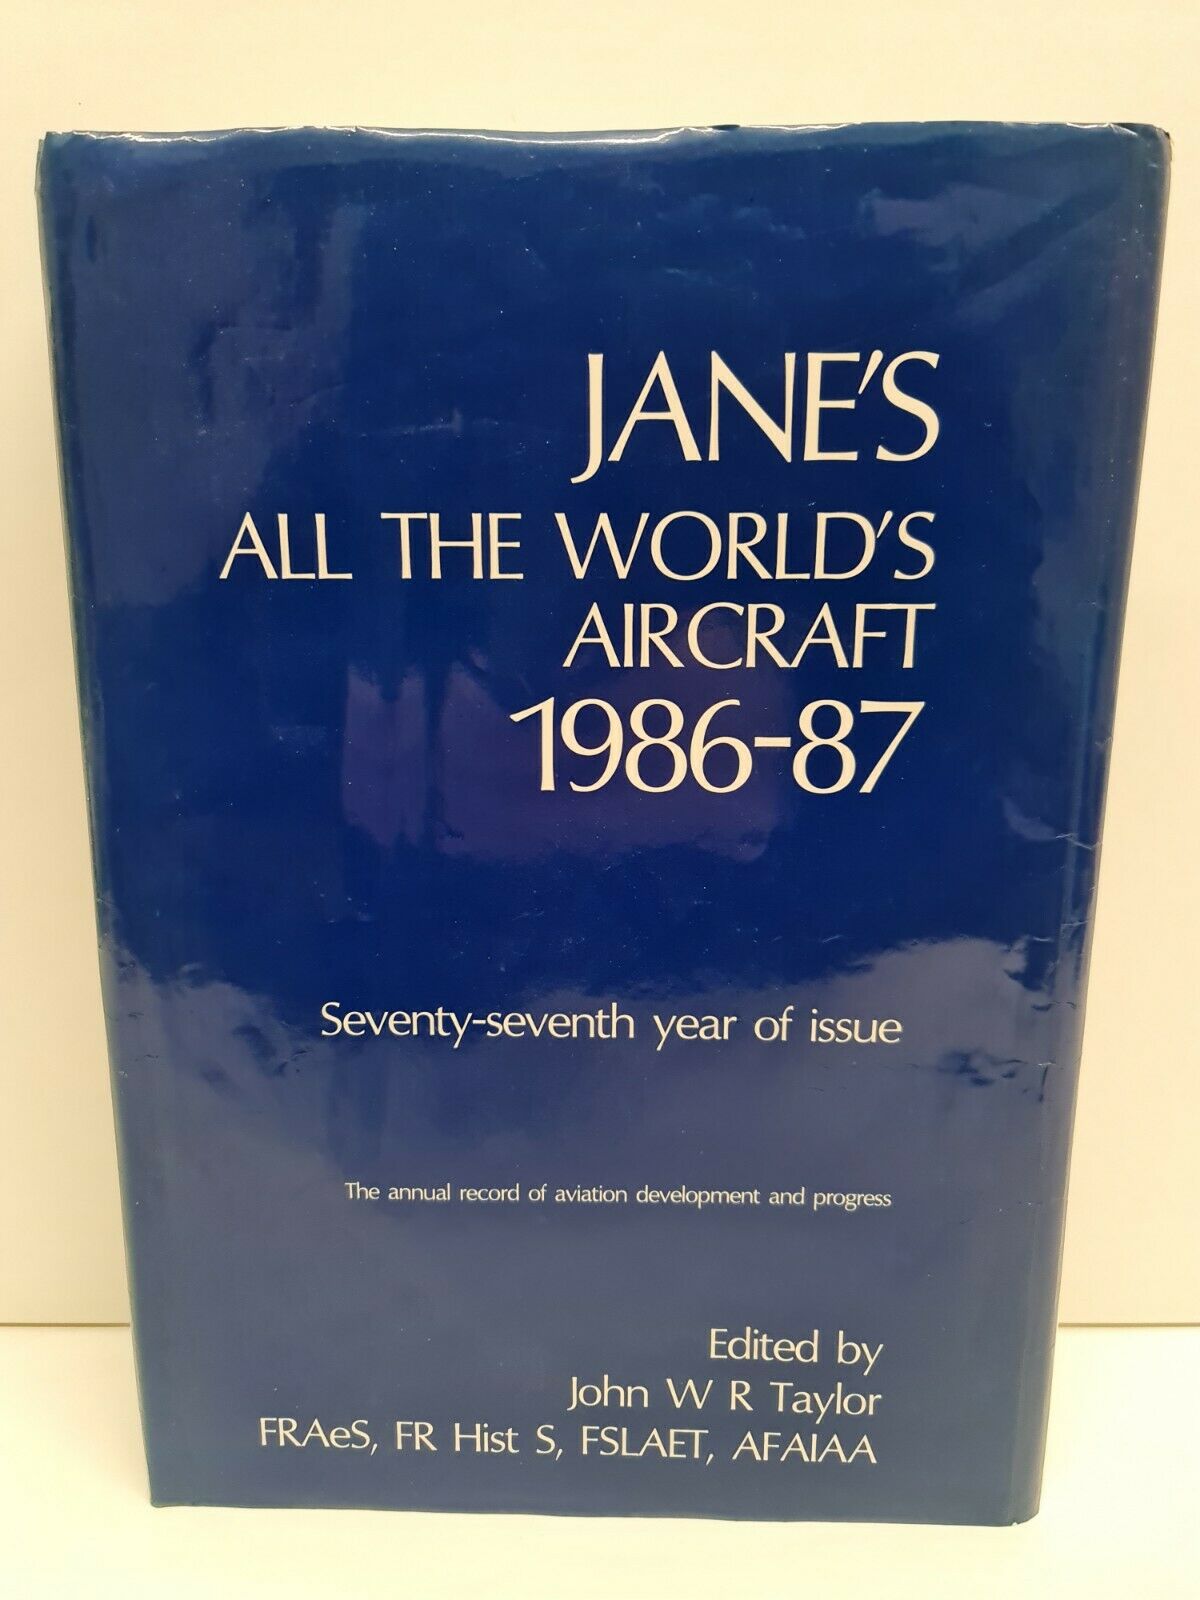 Jane's All the World's Aircraft 1986-87 by John Taylor